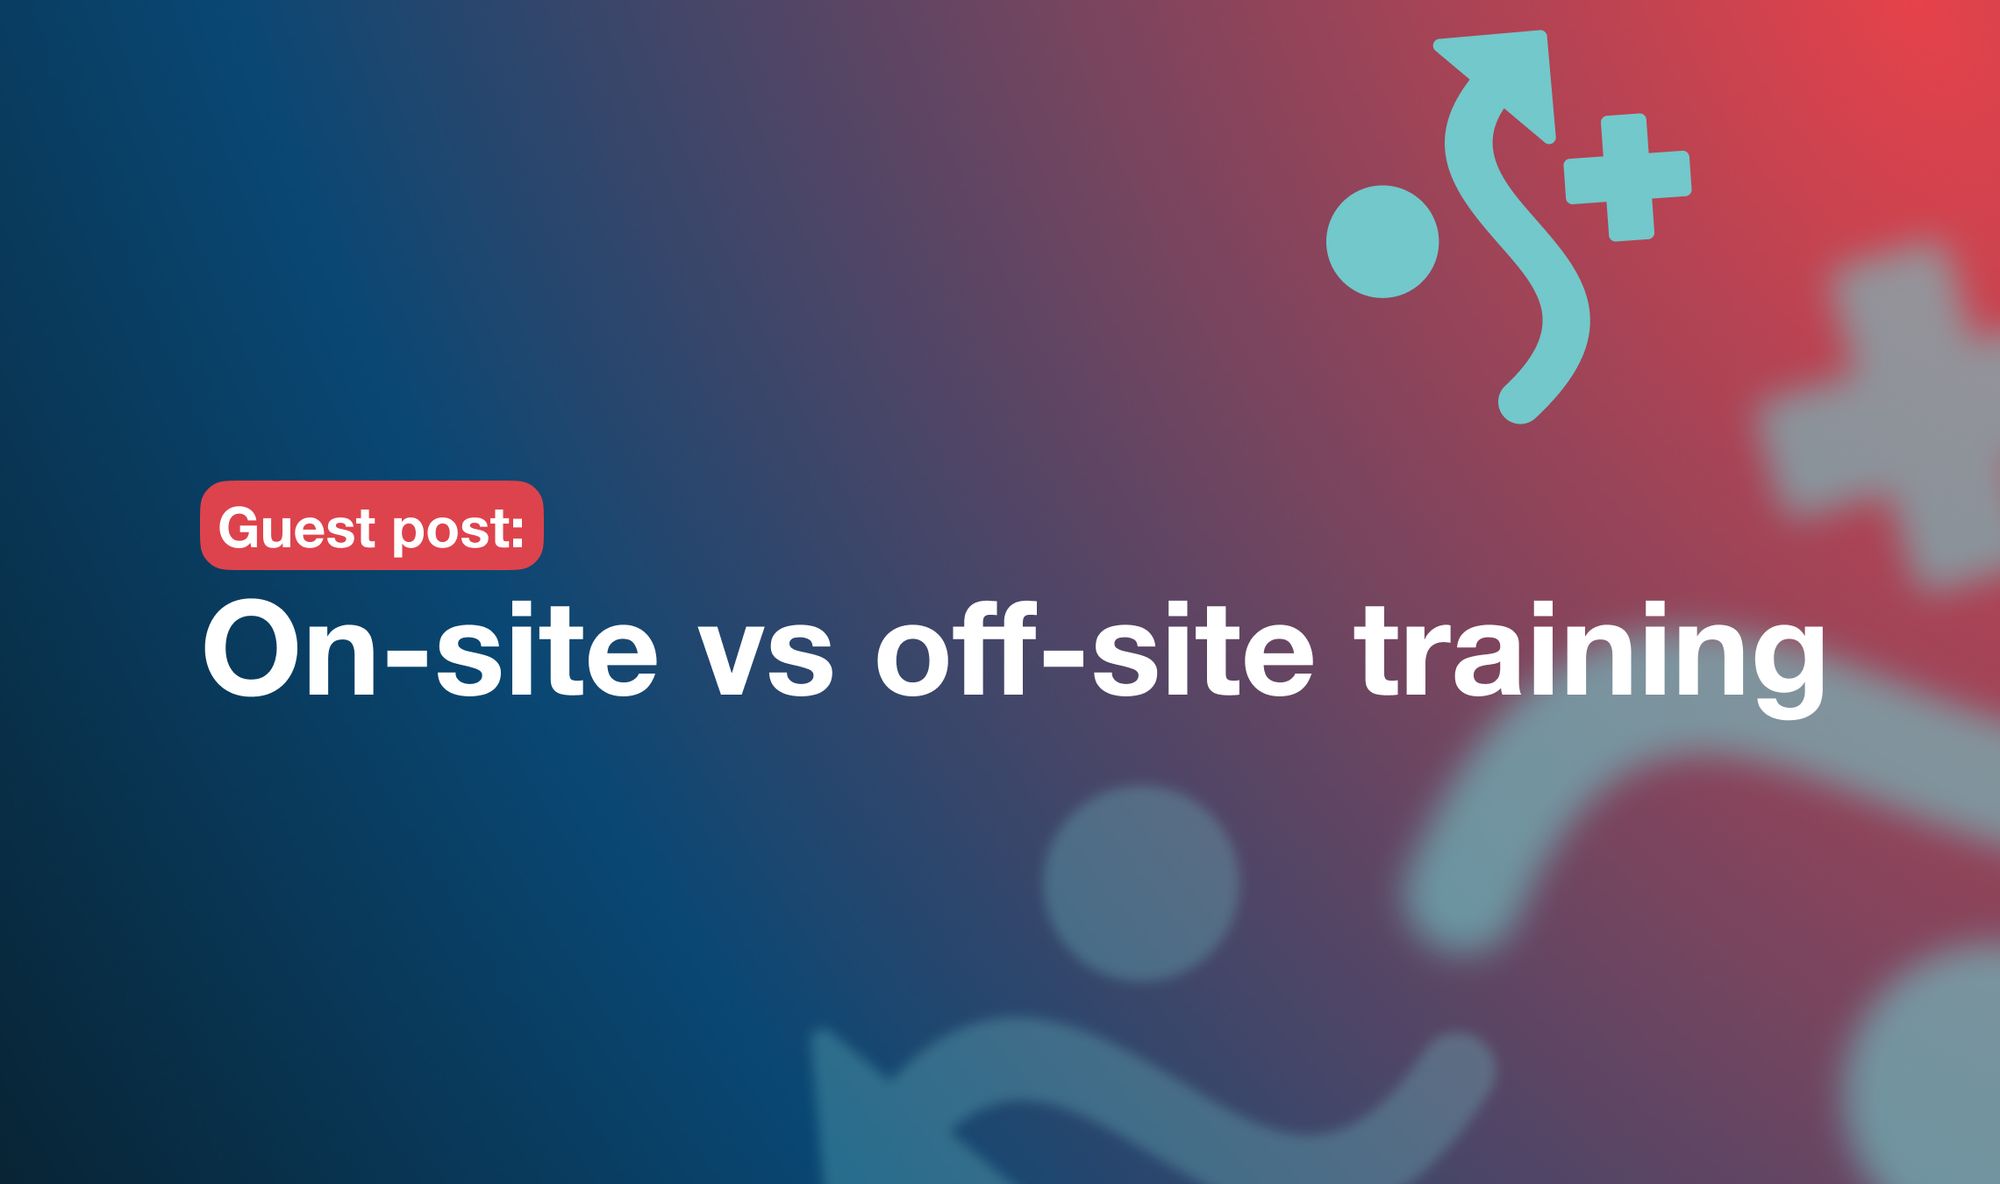 On-site vs off-site training